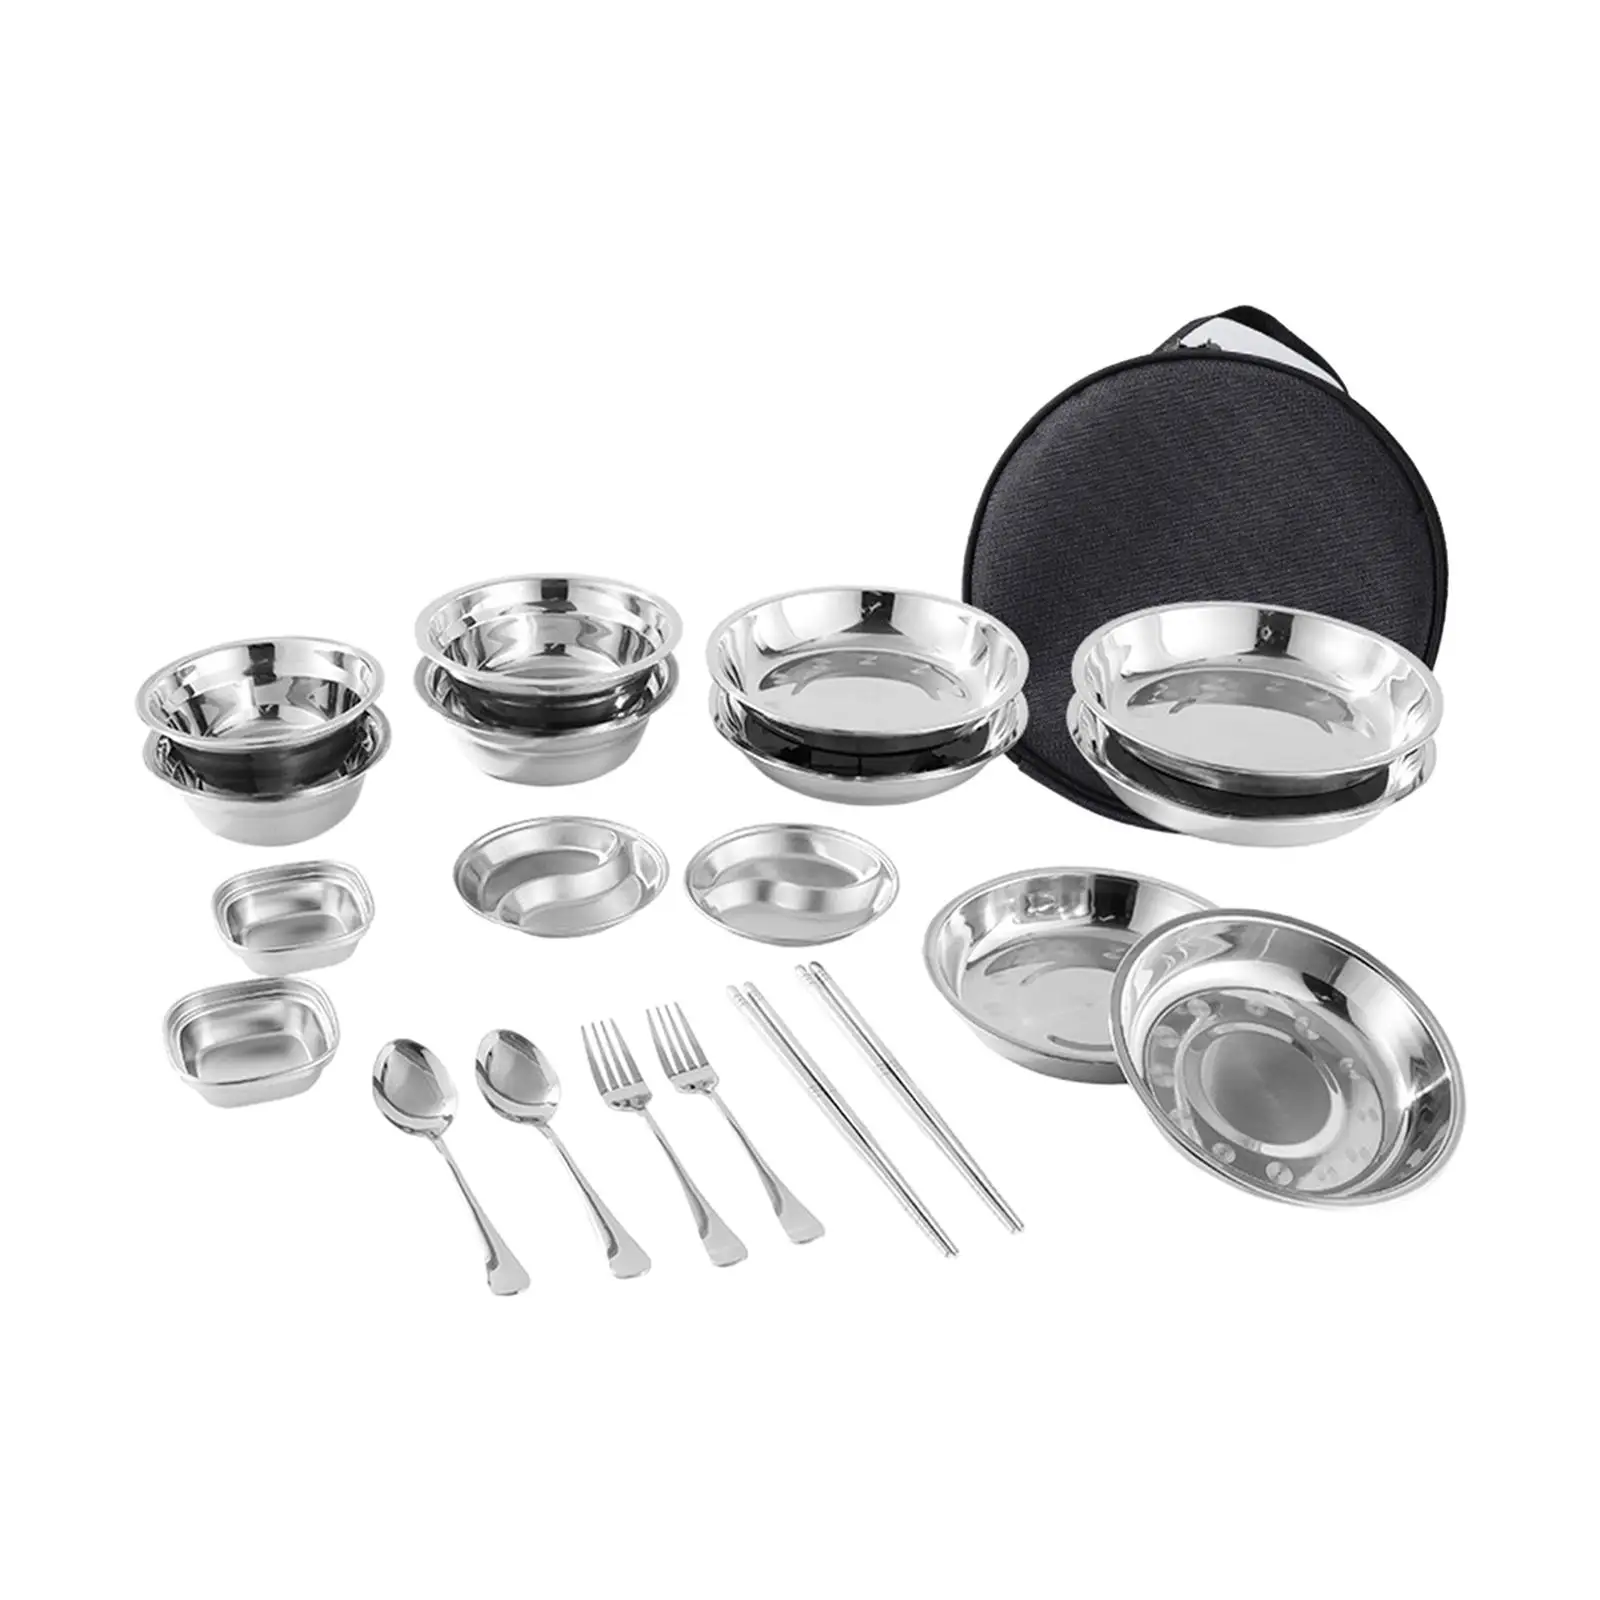 Stainless Steel Plates and Bowls Camping Cutlery Set Dishes Tableware with Carrying Bag Camping Utensils for Barbecue Travel